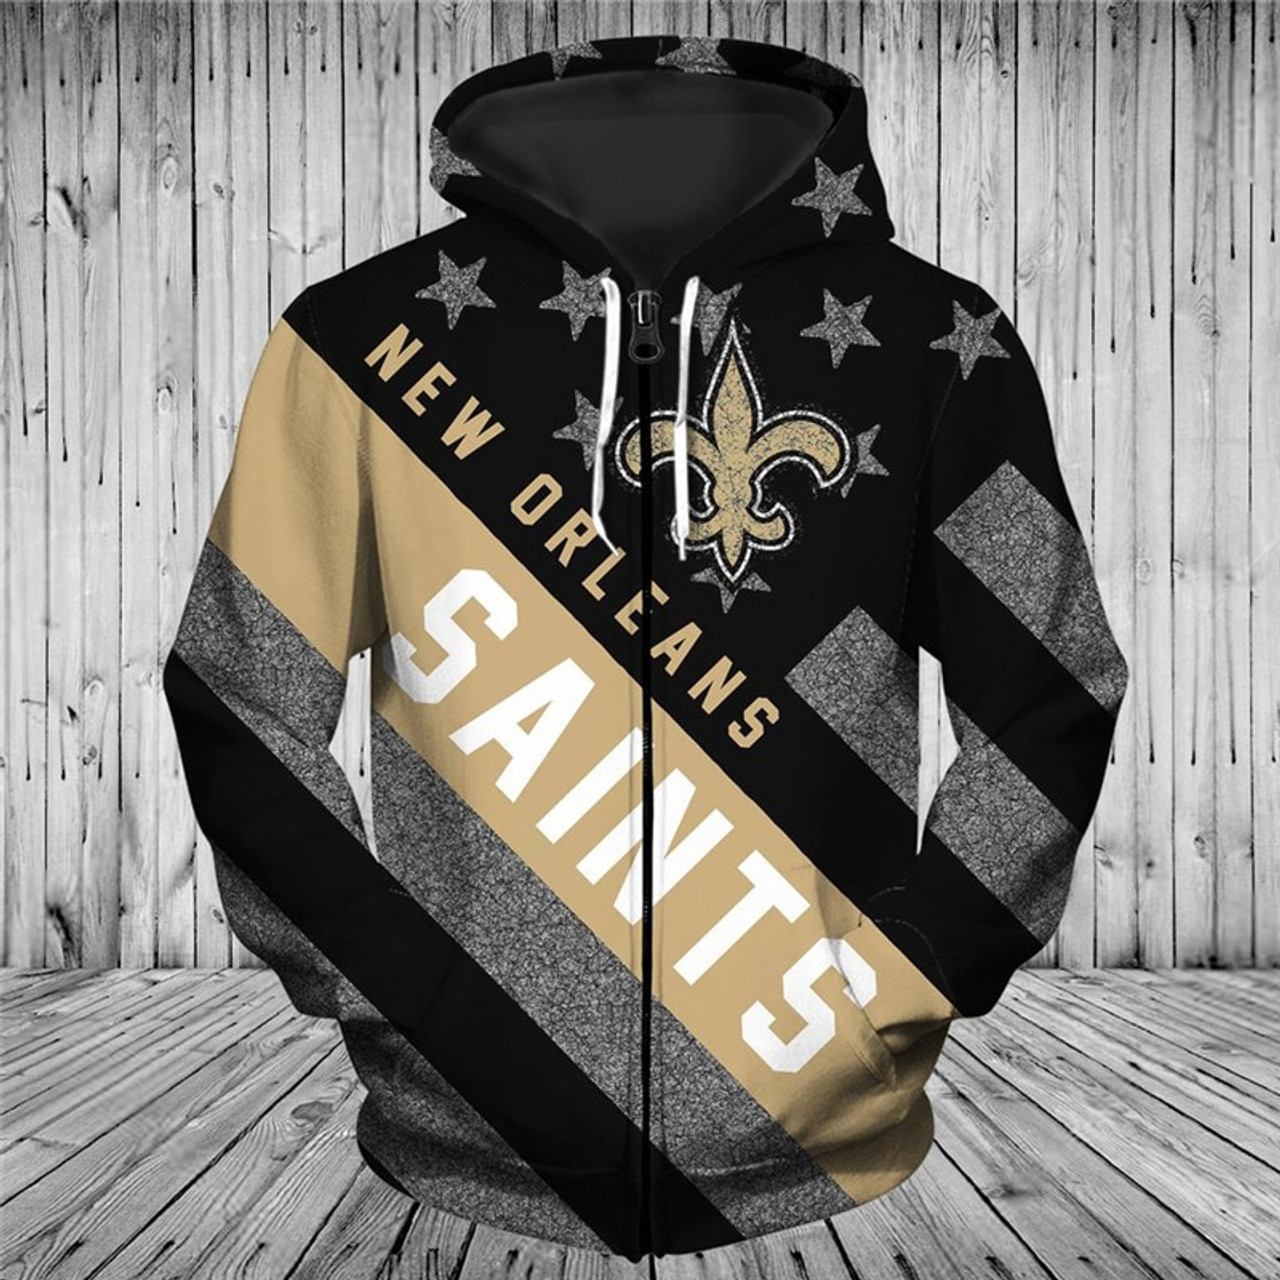 **(OFFICIAL-N.F.L.NEW-ORLEANS-SAINTS-TRENDY-PATRIOTIC-ZIPPERED-TEAM-HOODIES/NICE-CUSTOM-3D-EFFECT-GRAPHIC-PRINTED-DOUBLE-SIDED-ALL-OVER-OFFICIAL-SAINTS-LOGOS & CLASSIC-SAINTS-TEAM-COLORS/WARM-PREMIUM-OFFICIAL-N.F.L.SAINTS-TEAM-ZIPPERED-HOODIES)**